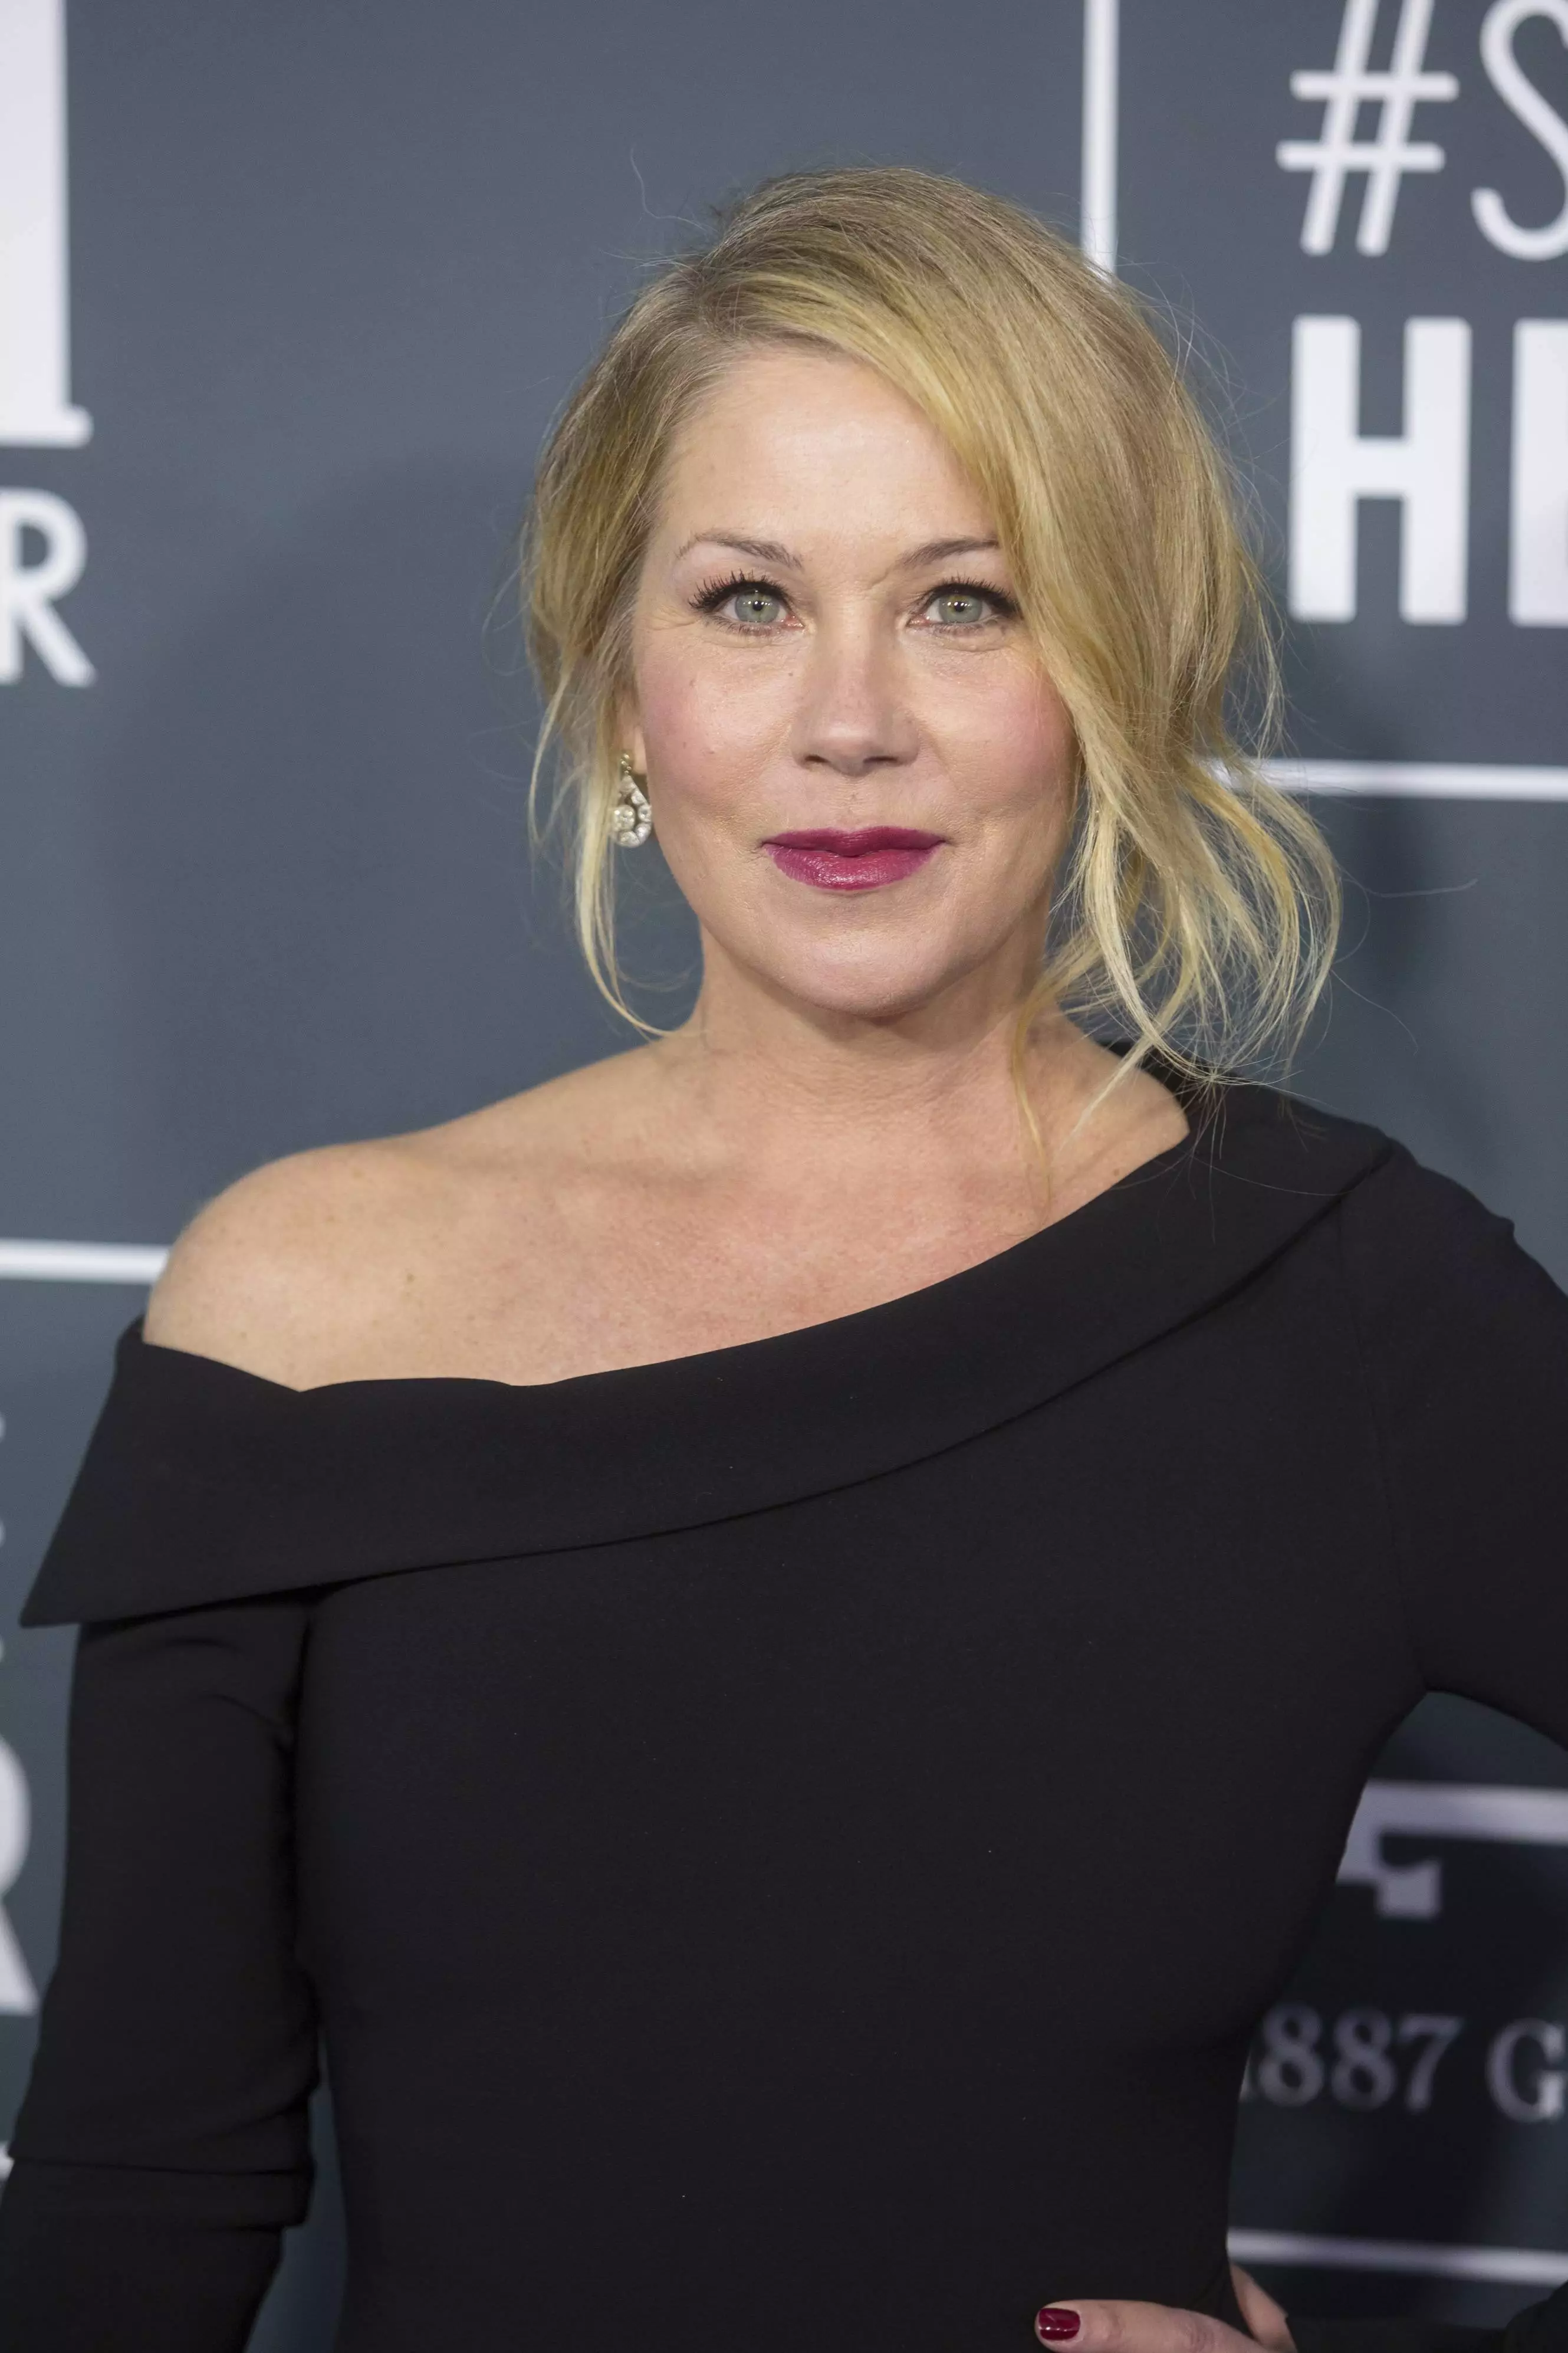 Christina Applegate revealed she has been diagnosed with MS.